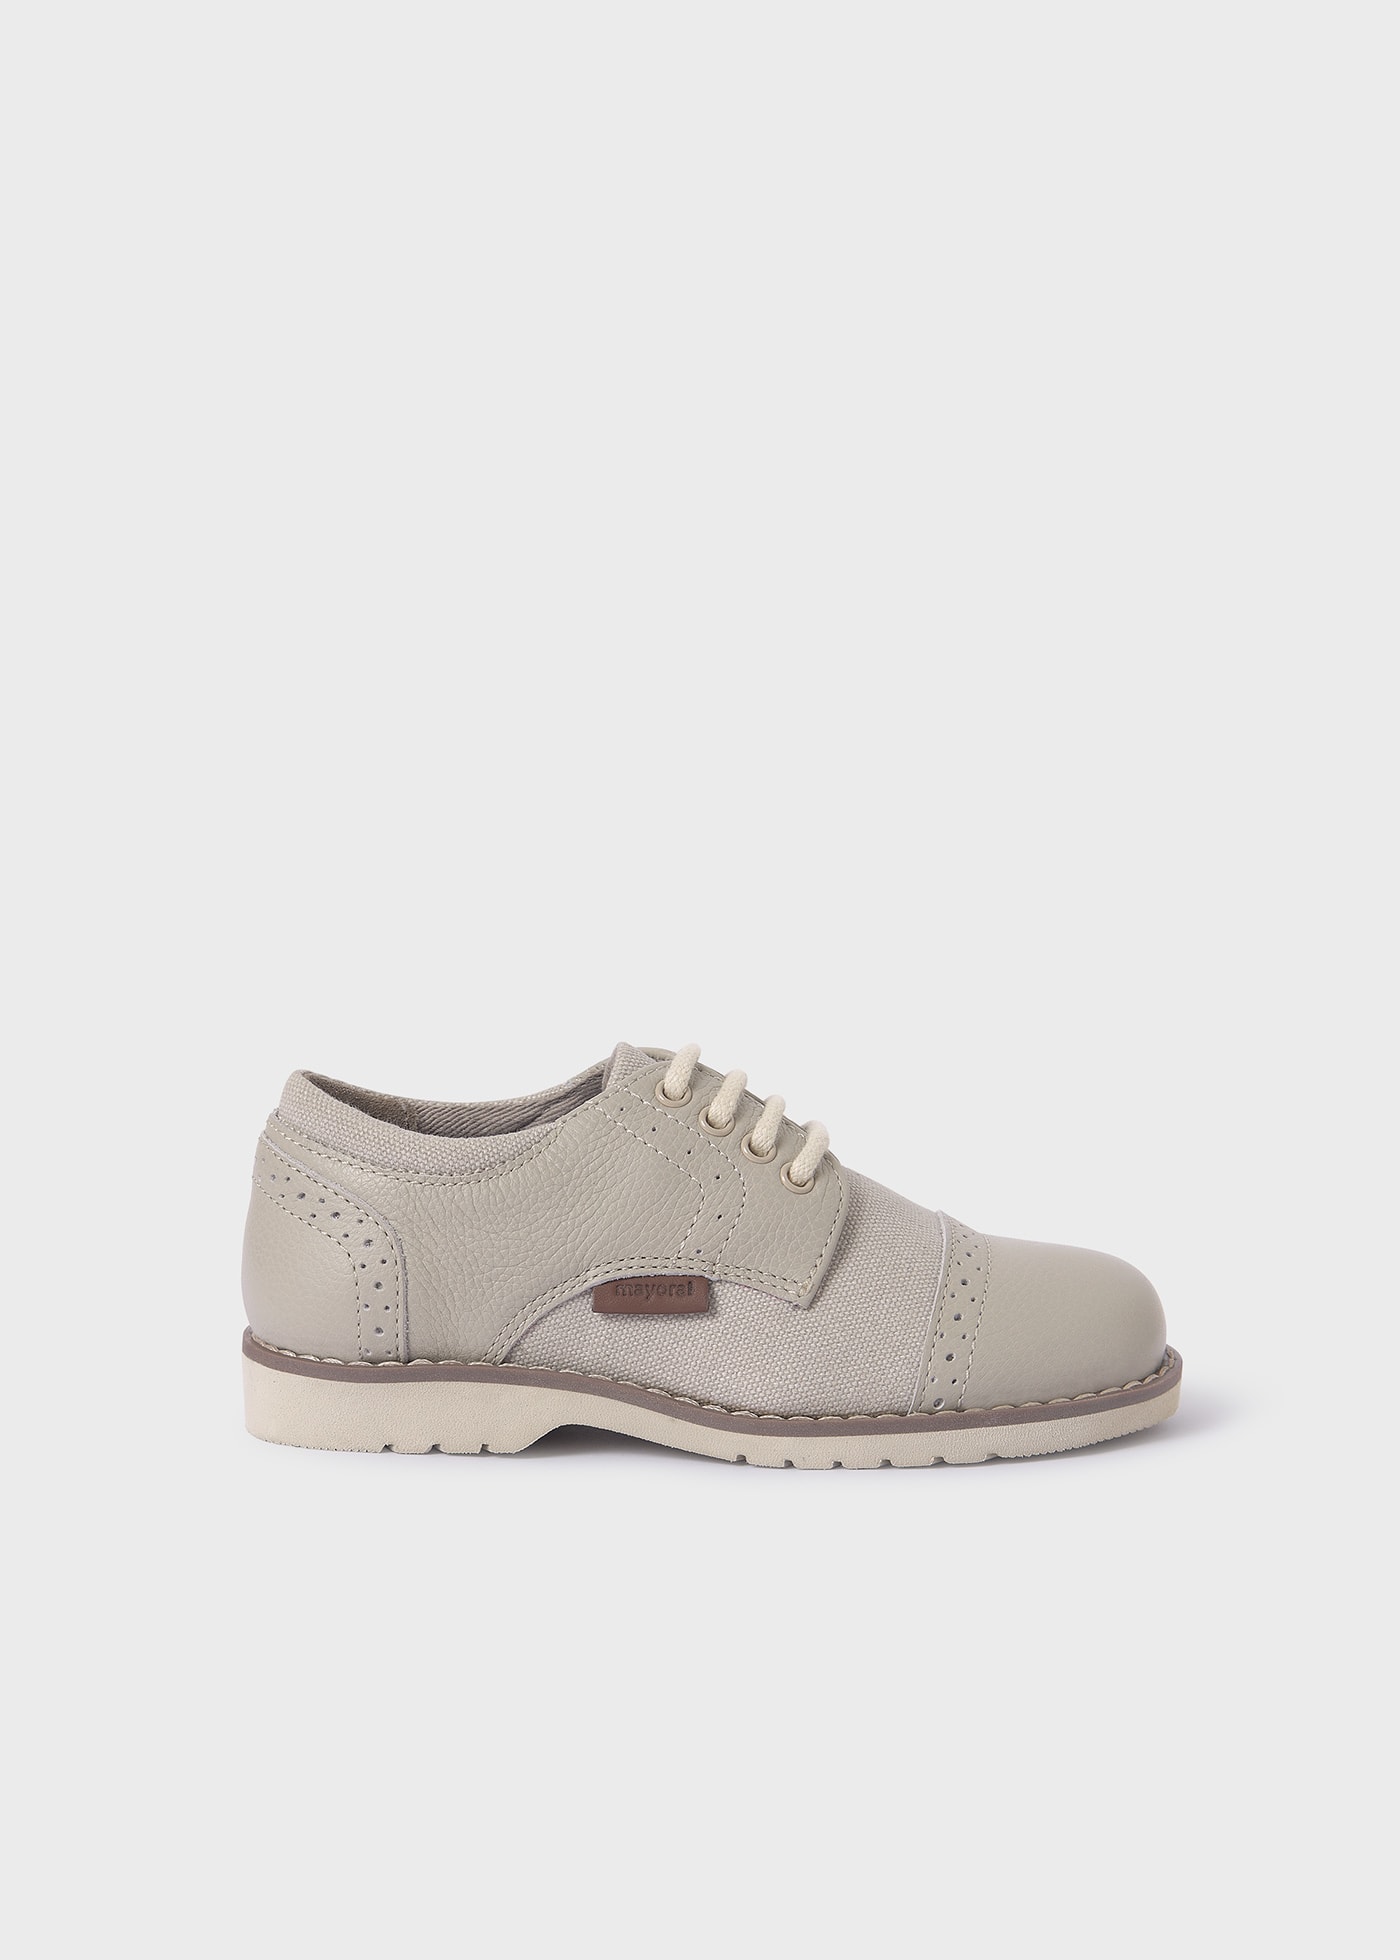 Boy Combined Oxford Shoe Leather